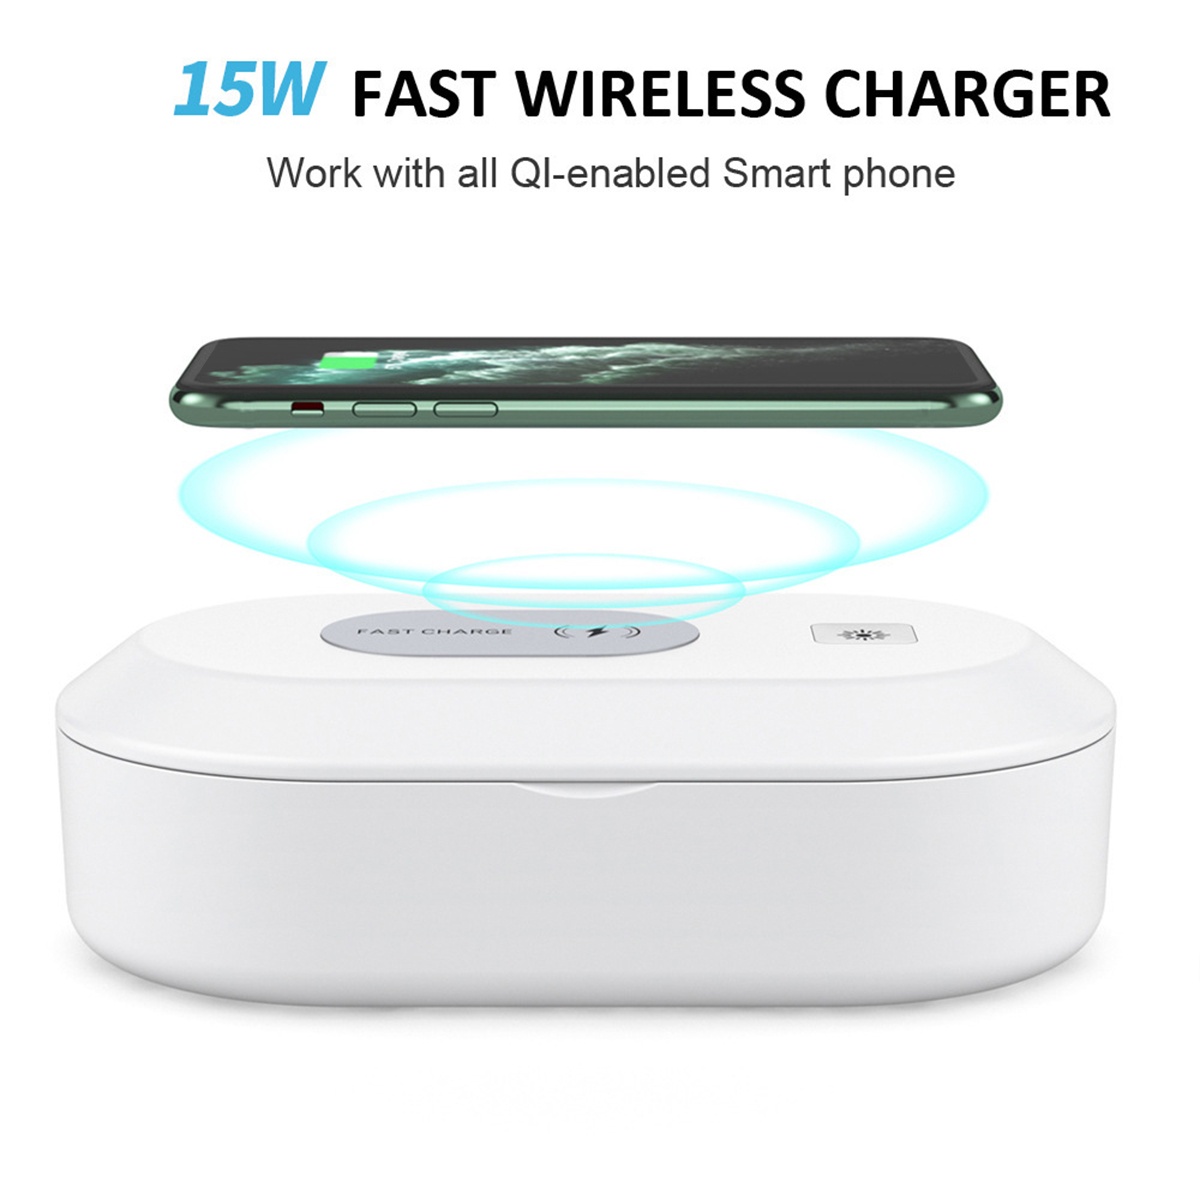 15W-Portable-Multifunctional-Phone-Disinfection-Box-Cleaner-Wireless-Charger-1730019-4